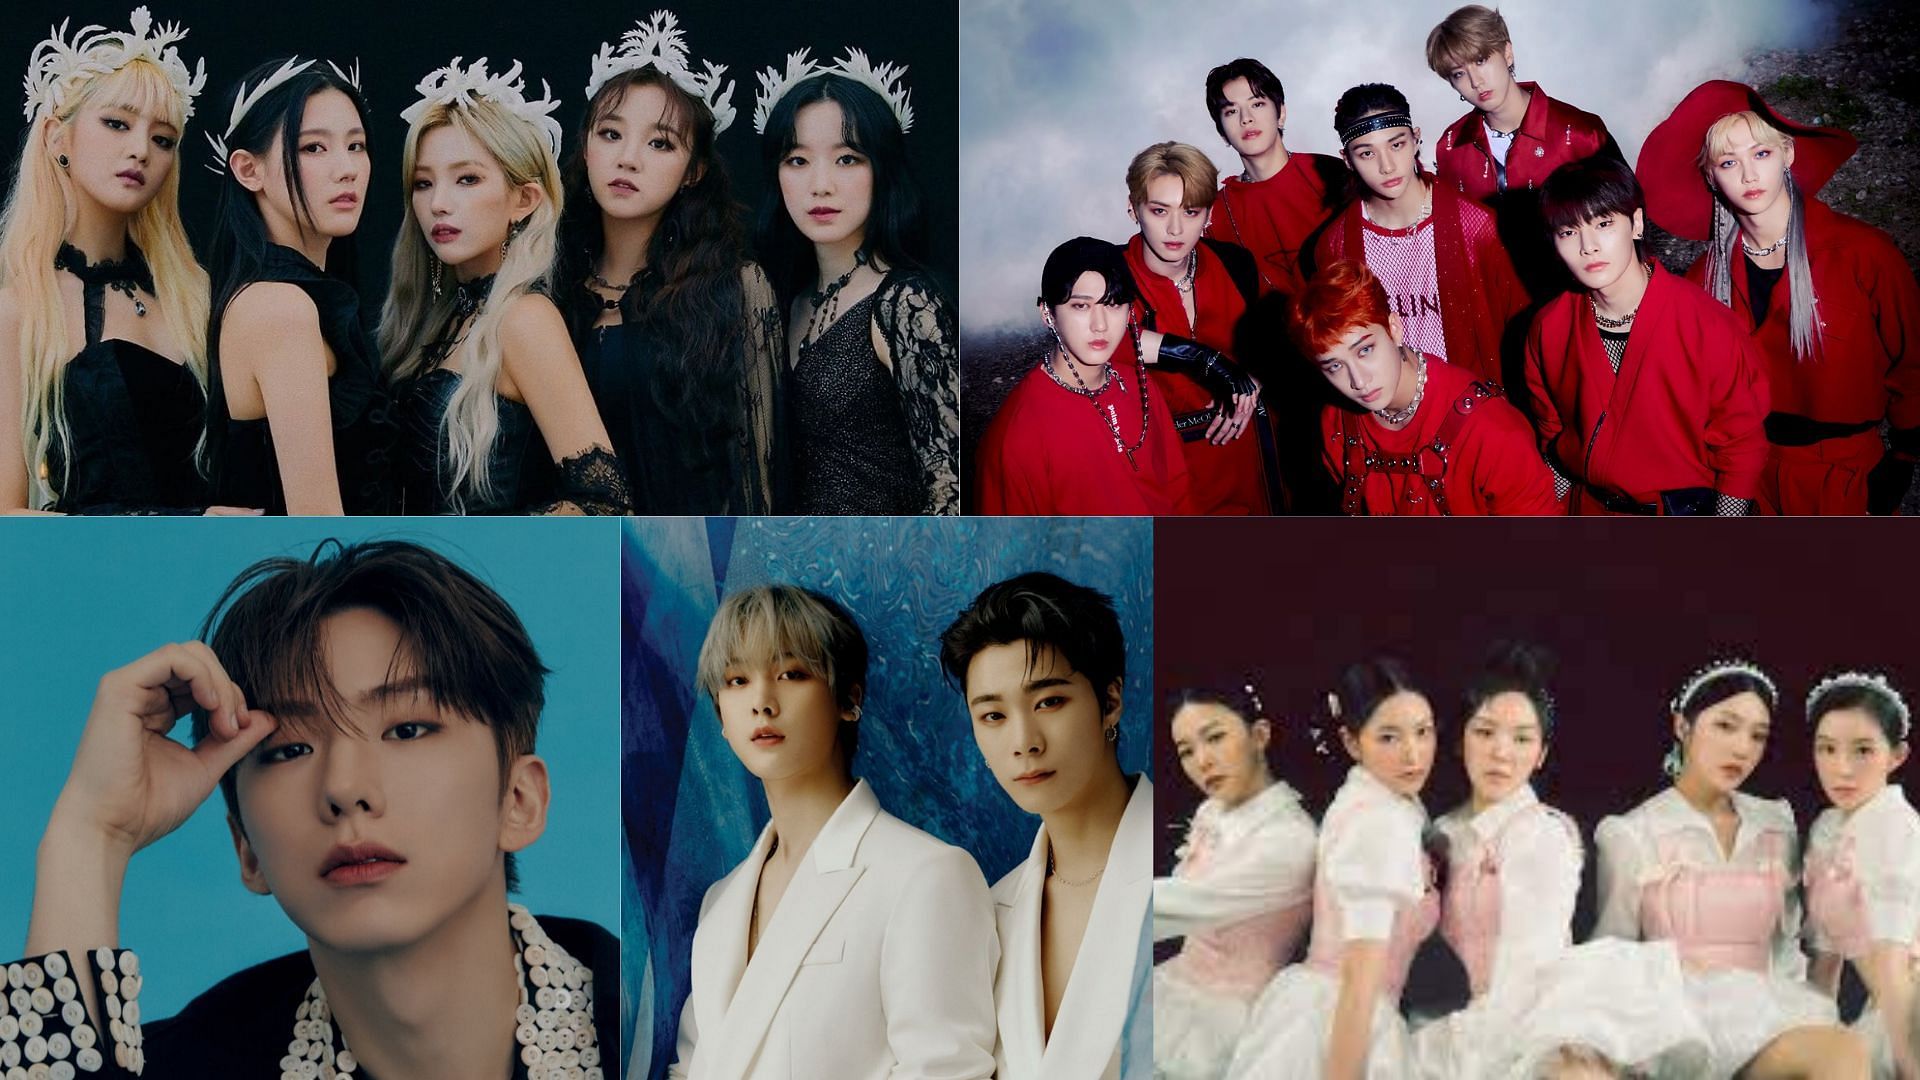 (G)I-DLE, Stray Kids, Kihyun, Moonbin and Sanha, Red Velvet (Image via @G_I_DLE/Twitter, @Stray_Kids/Twitter, @OfficialMonstaX/Twitter, @offclASTRO/Twitter, @RVsmtown/Twitter, and Canva)